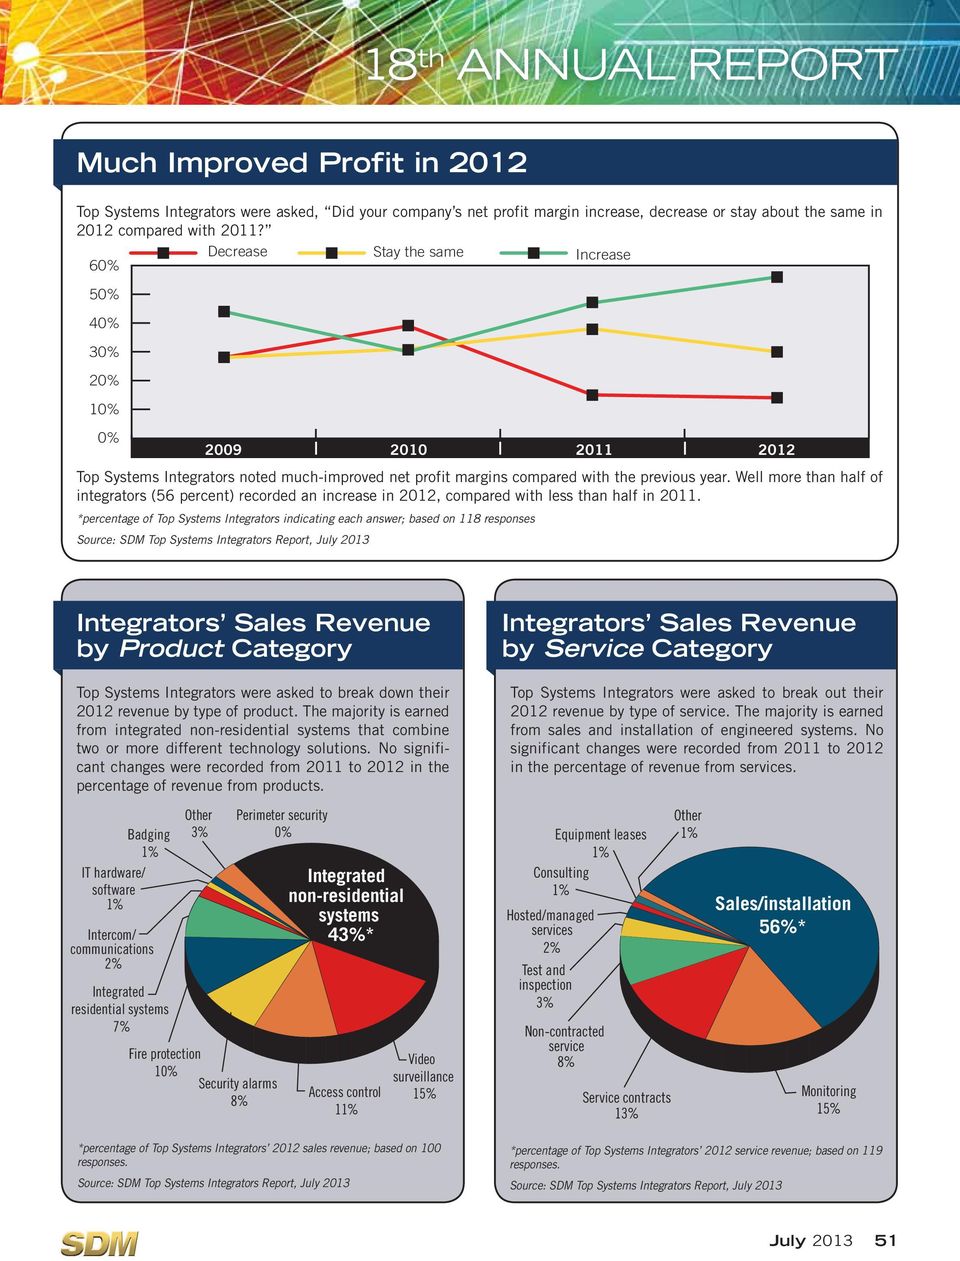 Well more than half of integrators (56 percent) recorded an increase in 2012, compared with less than half in 2011.